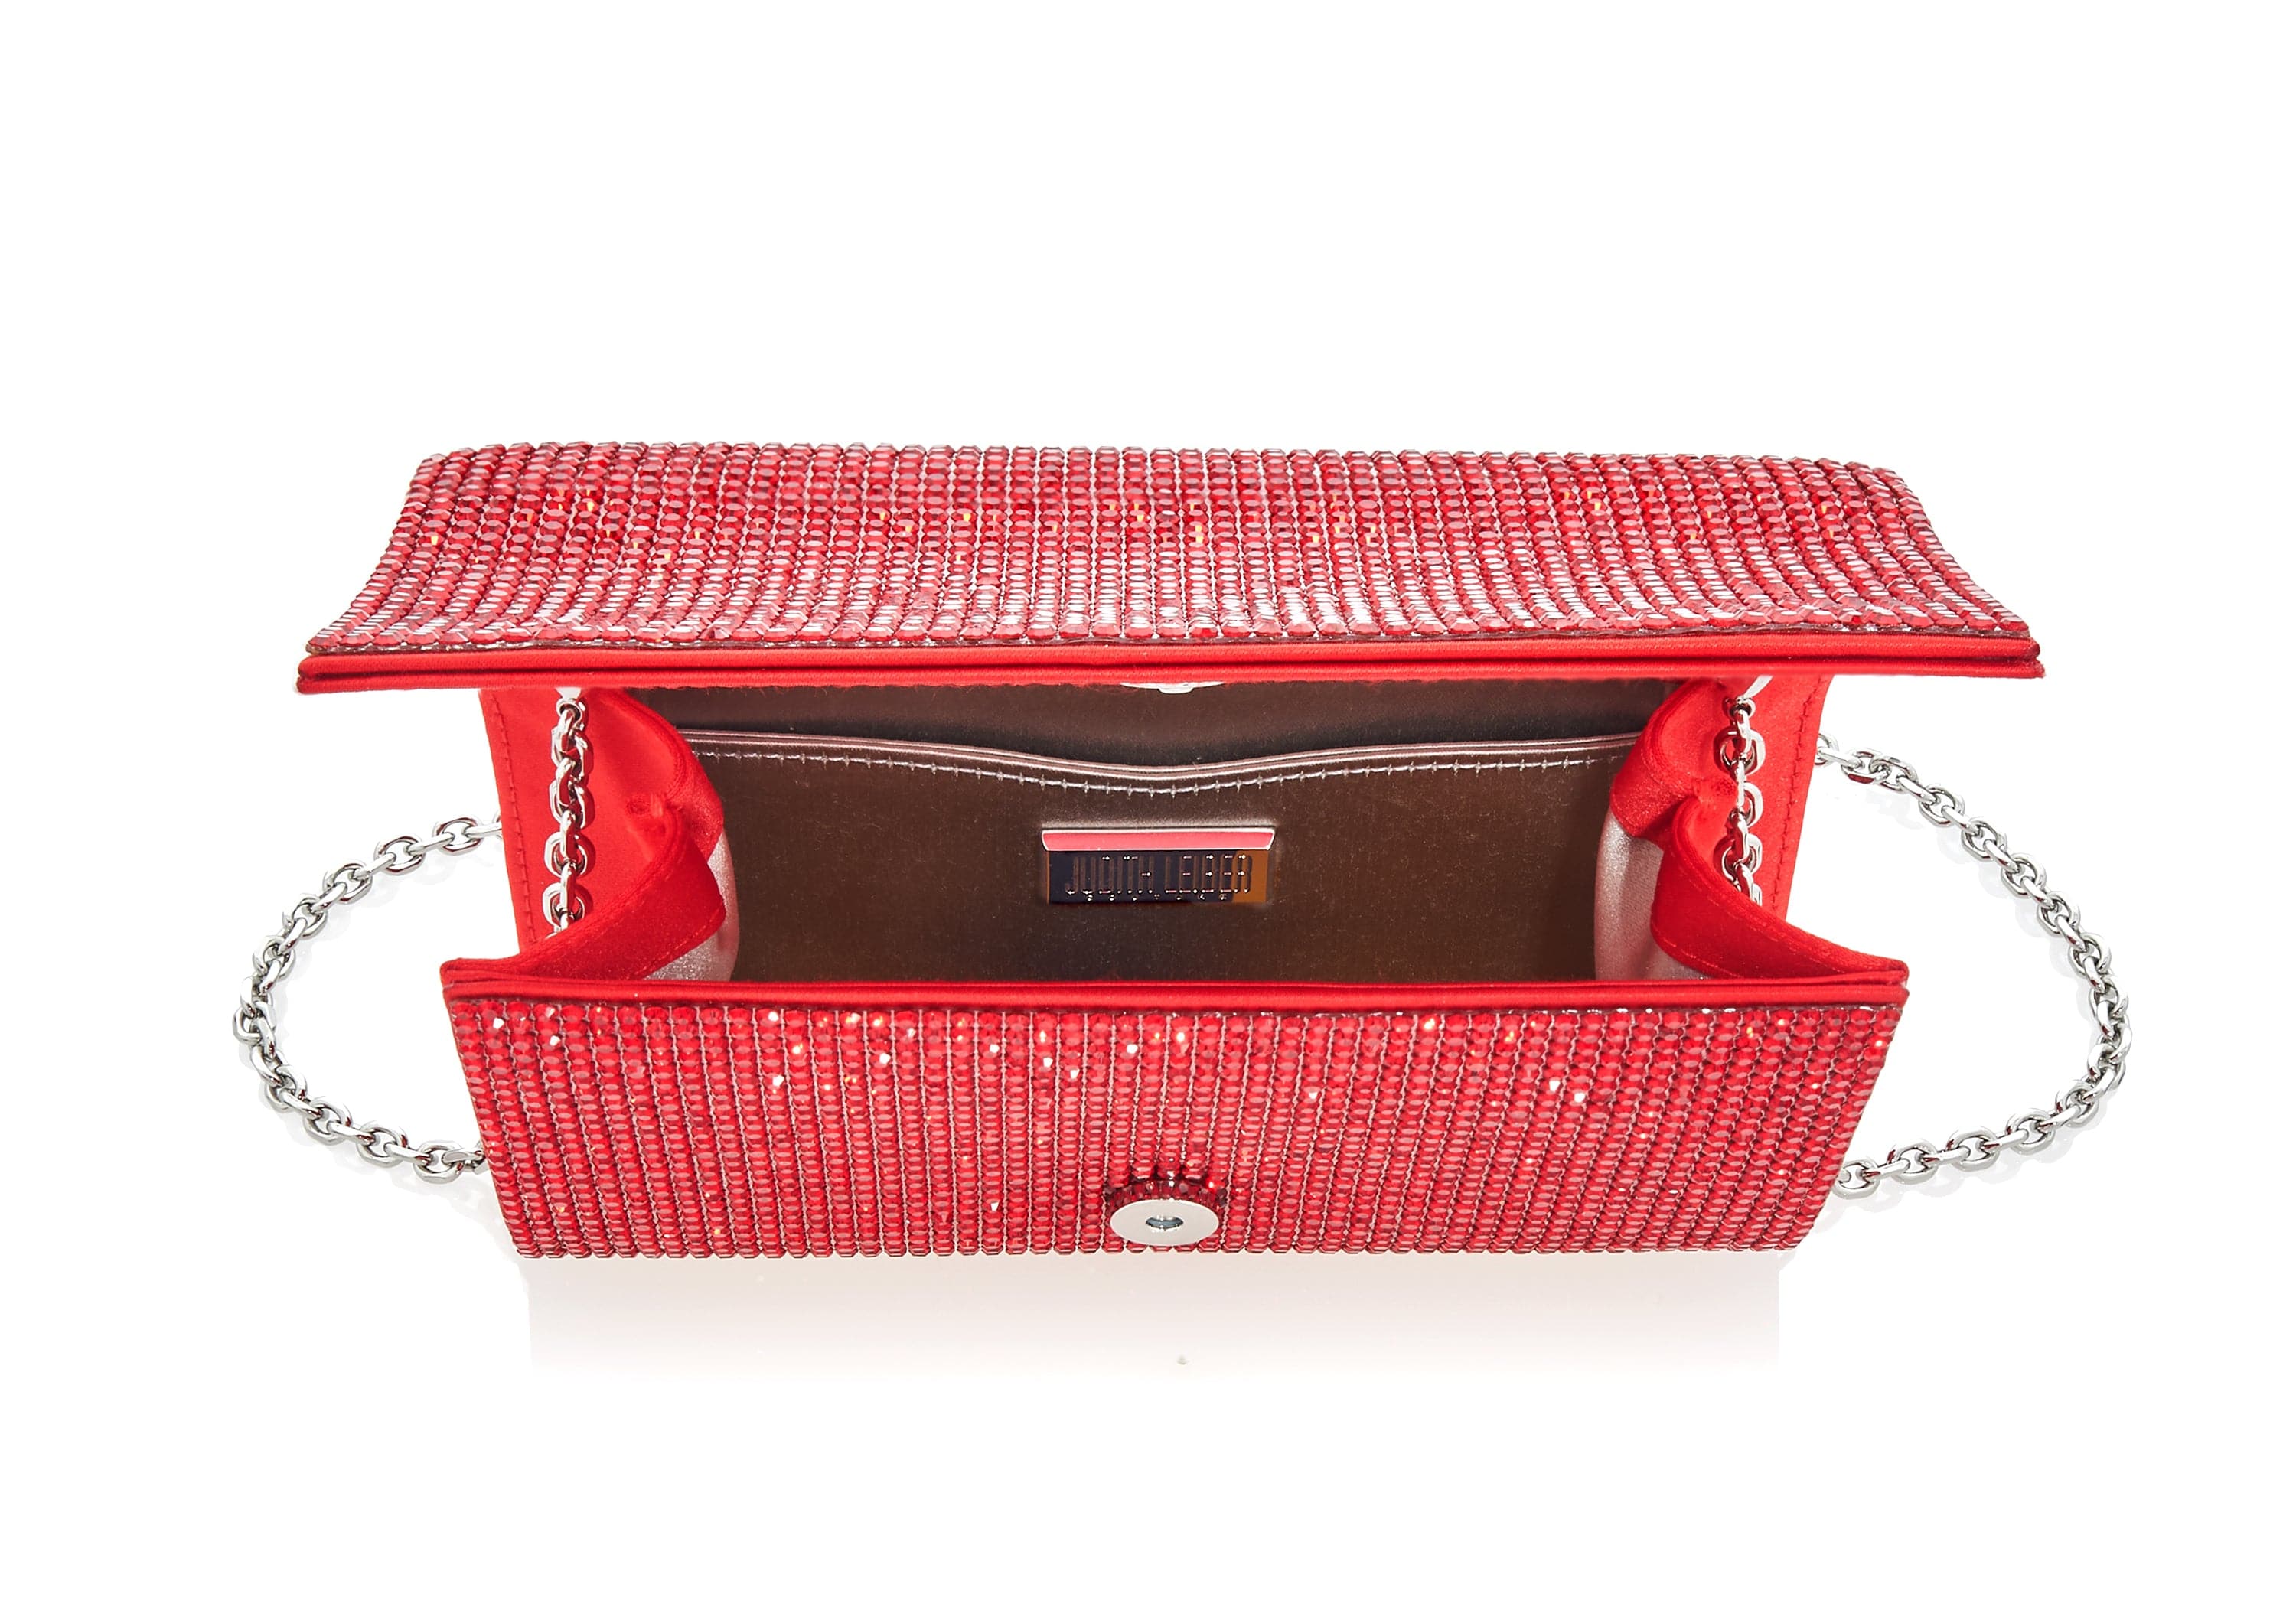 JUDITH LEIBER RED MADISON SATIN BOW CLUTCH BAG